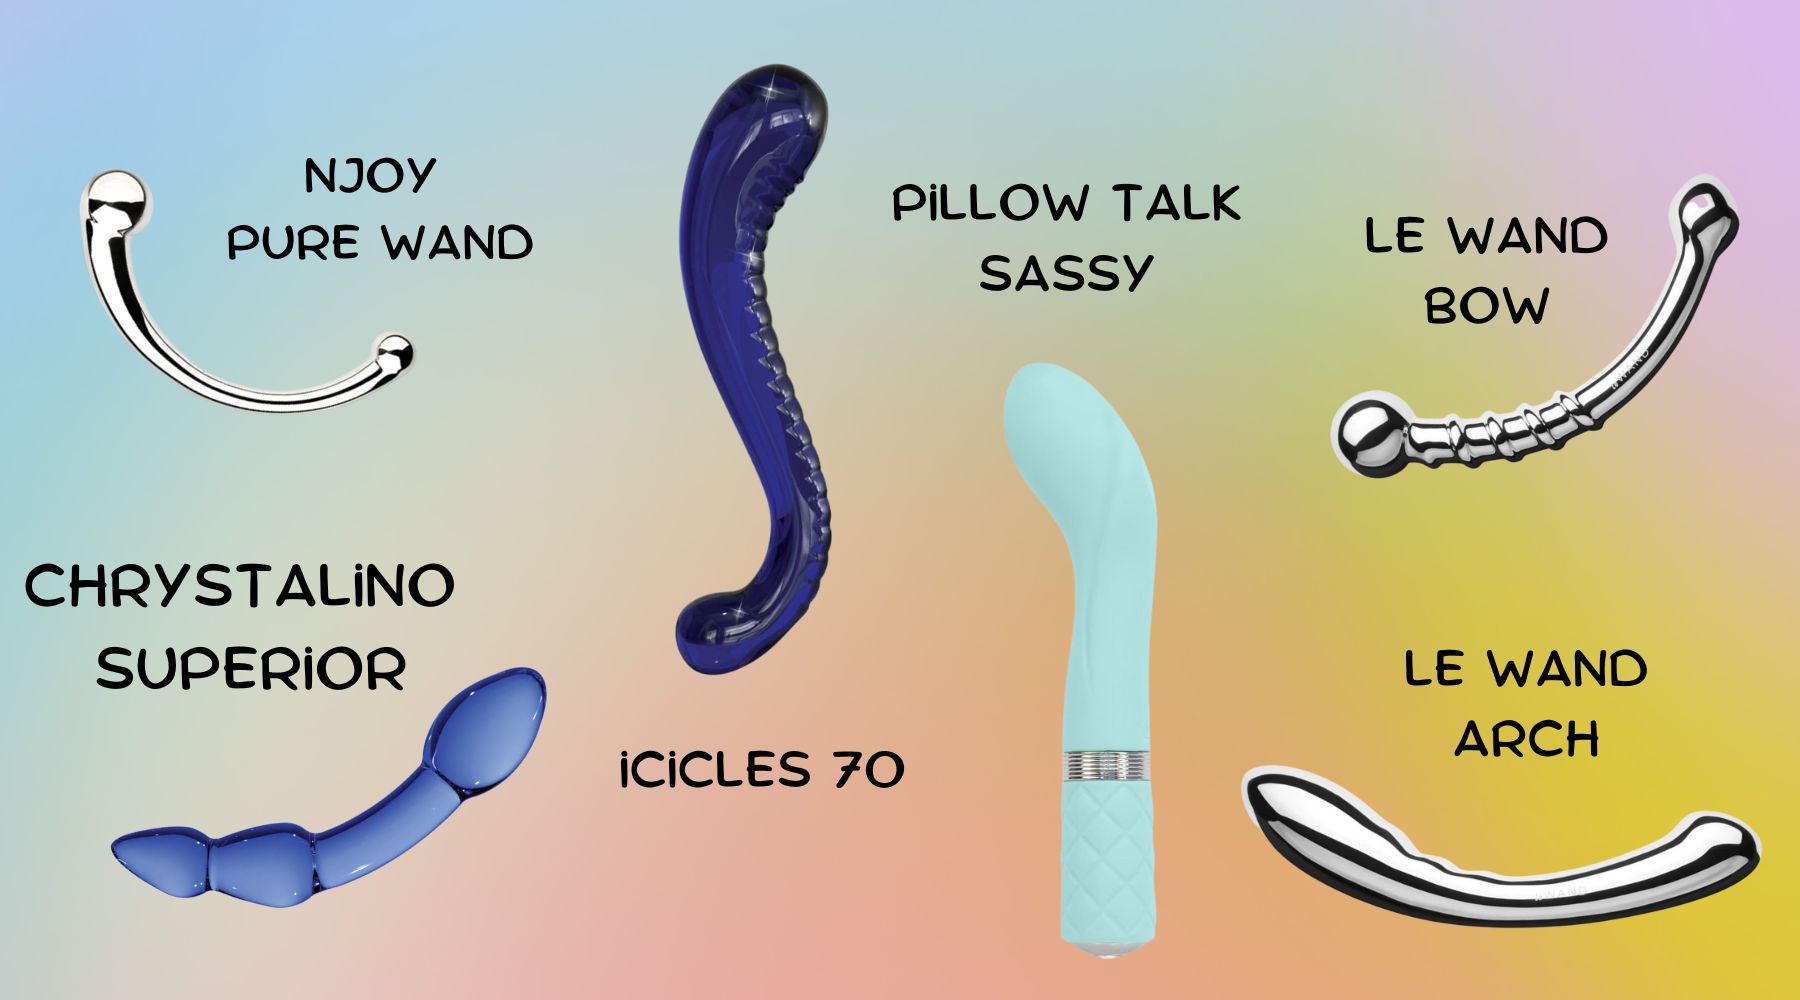 G-spot toys for oral sex